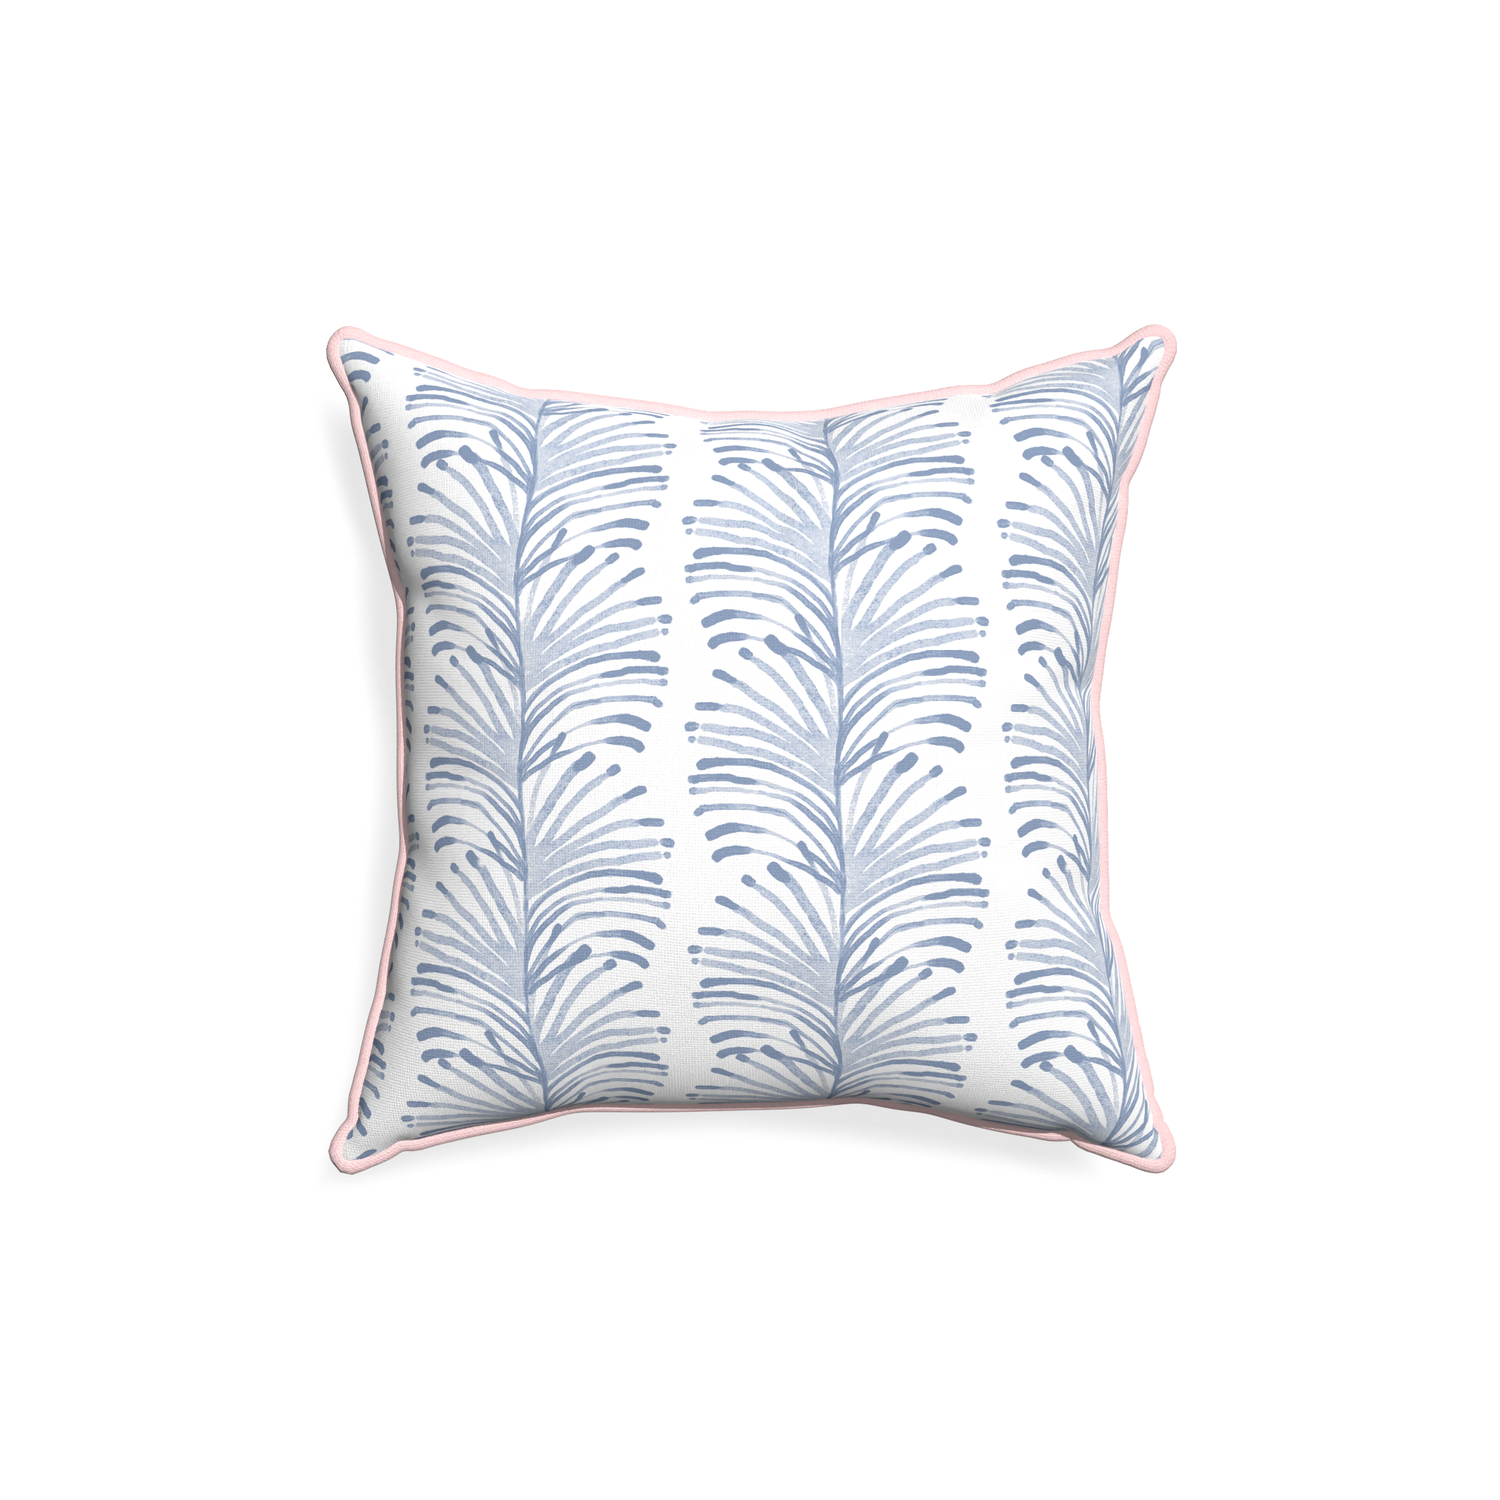 18-square emma sky custom pillow with petal piping on white background